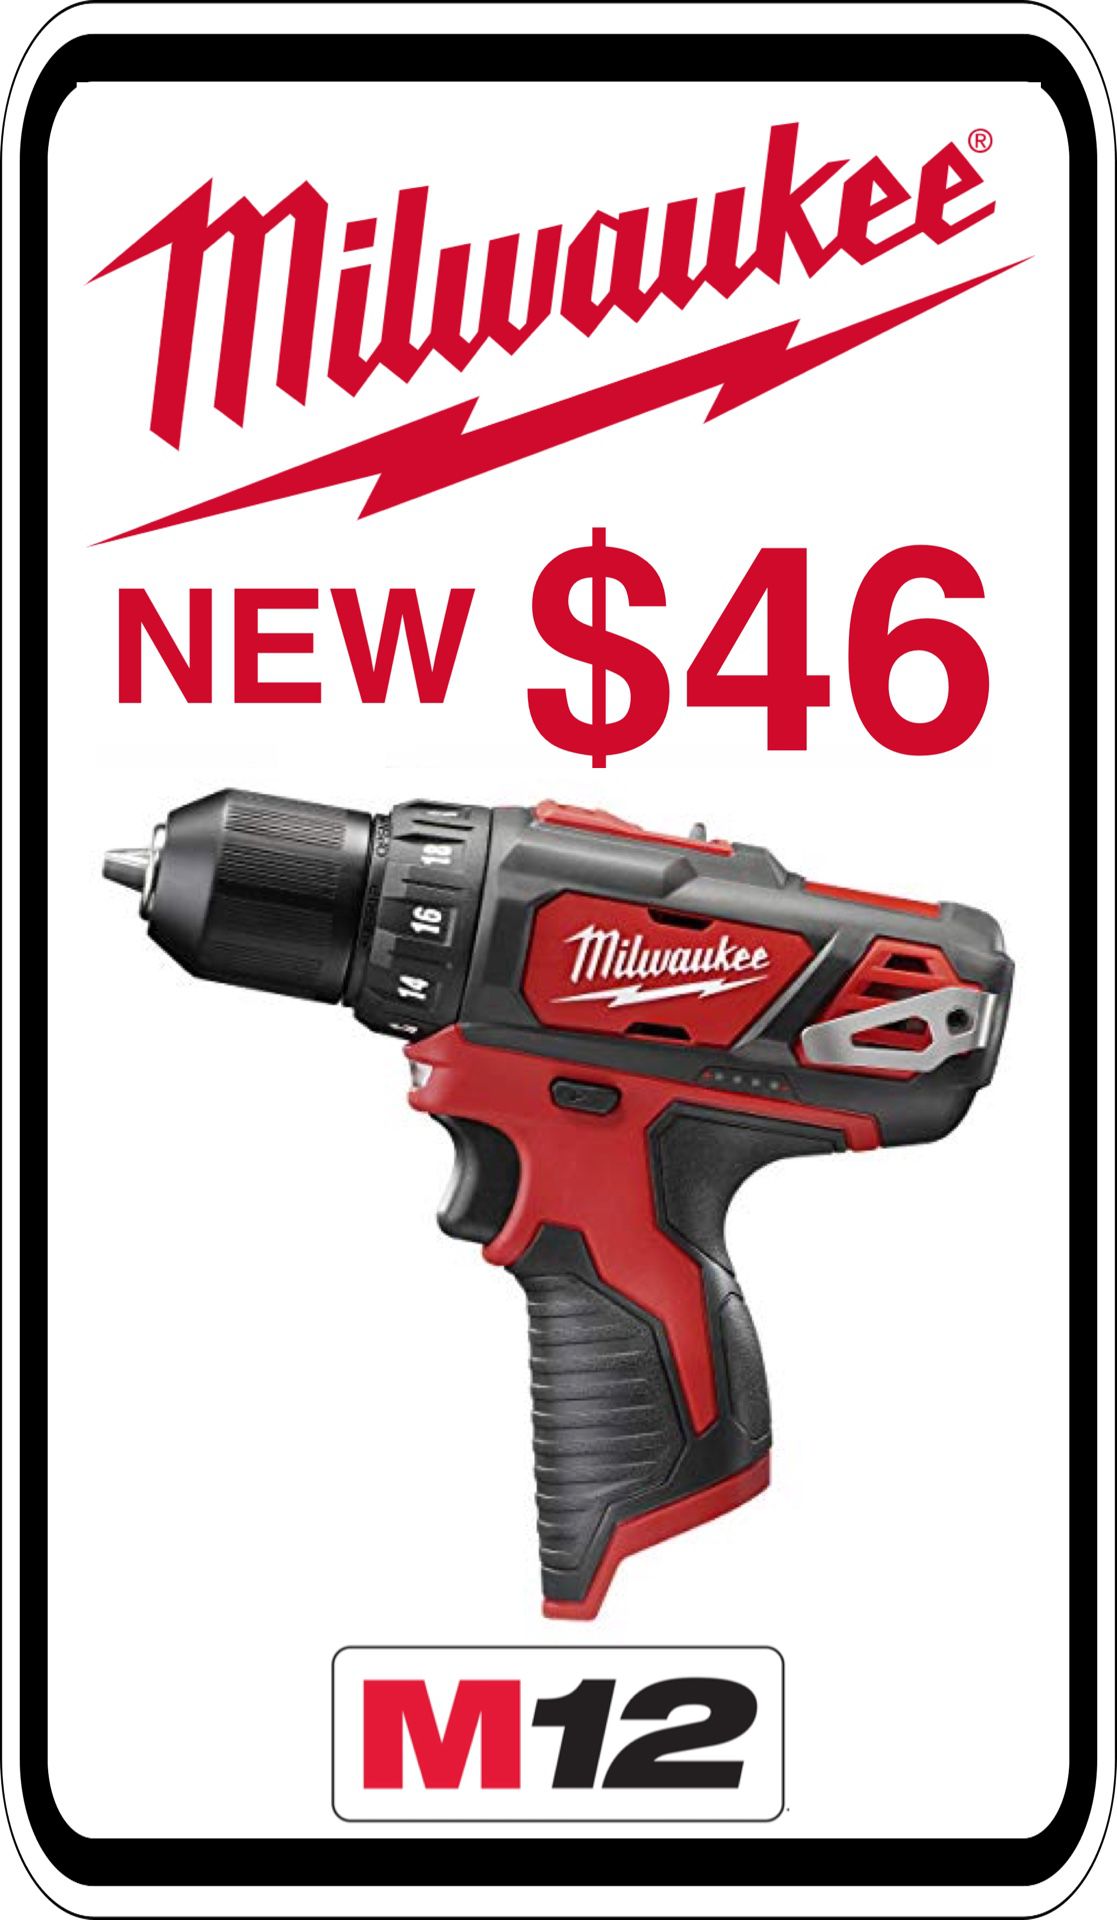 BRAND NEW - Milwaukee M12 Drill Driver - We accept trades & Credit Cards - AzBE Deals